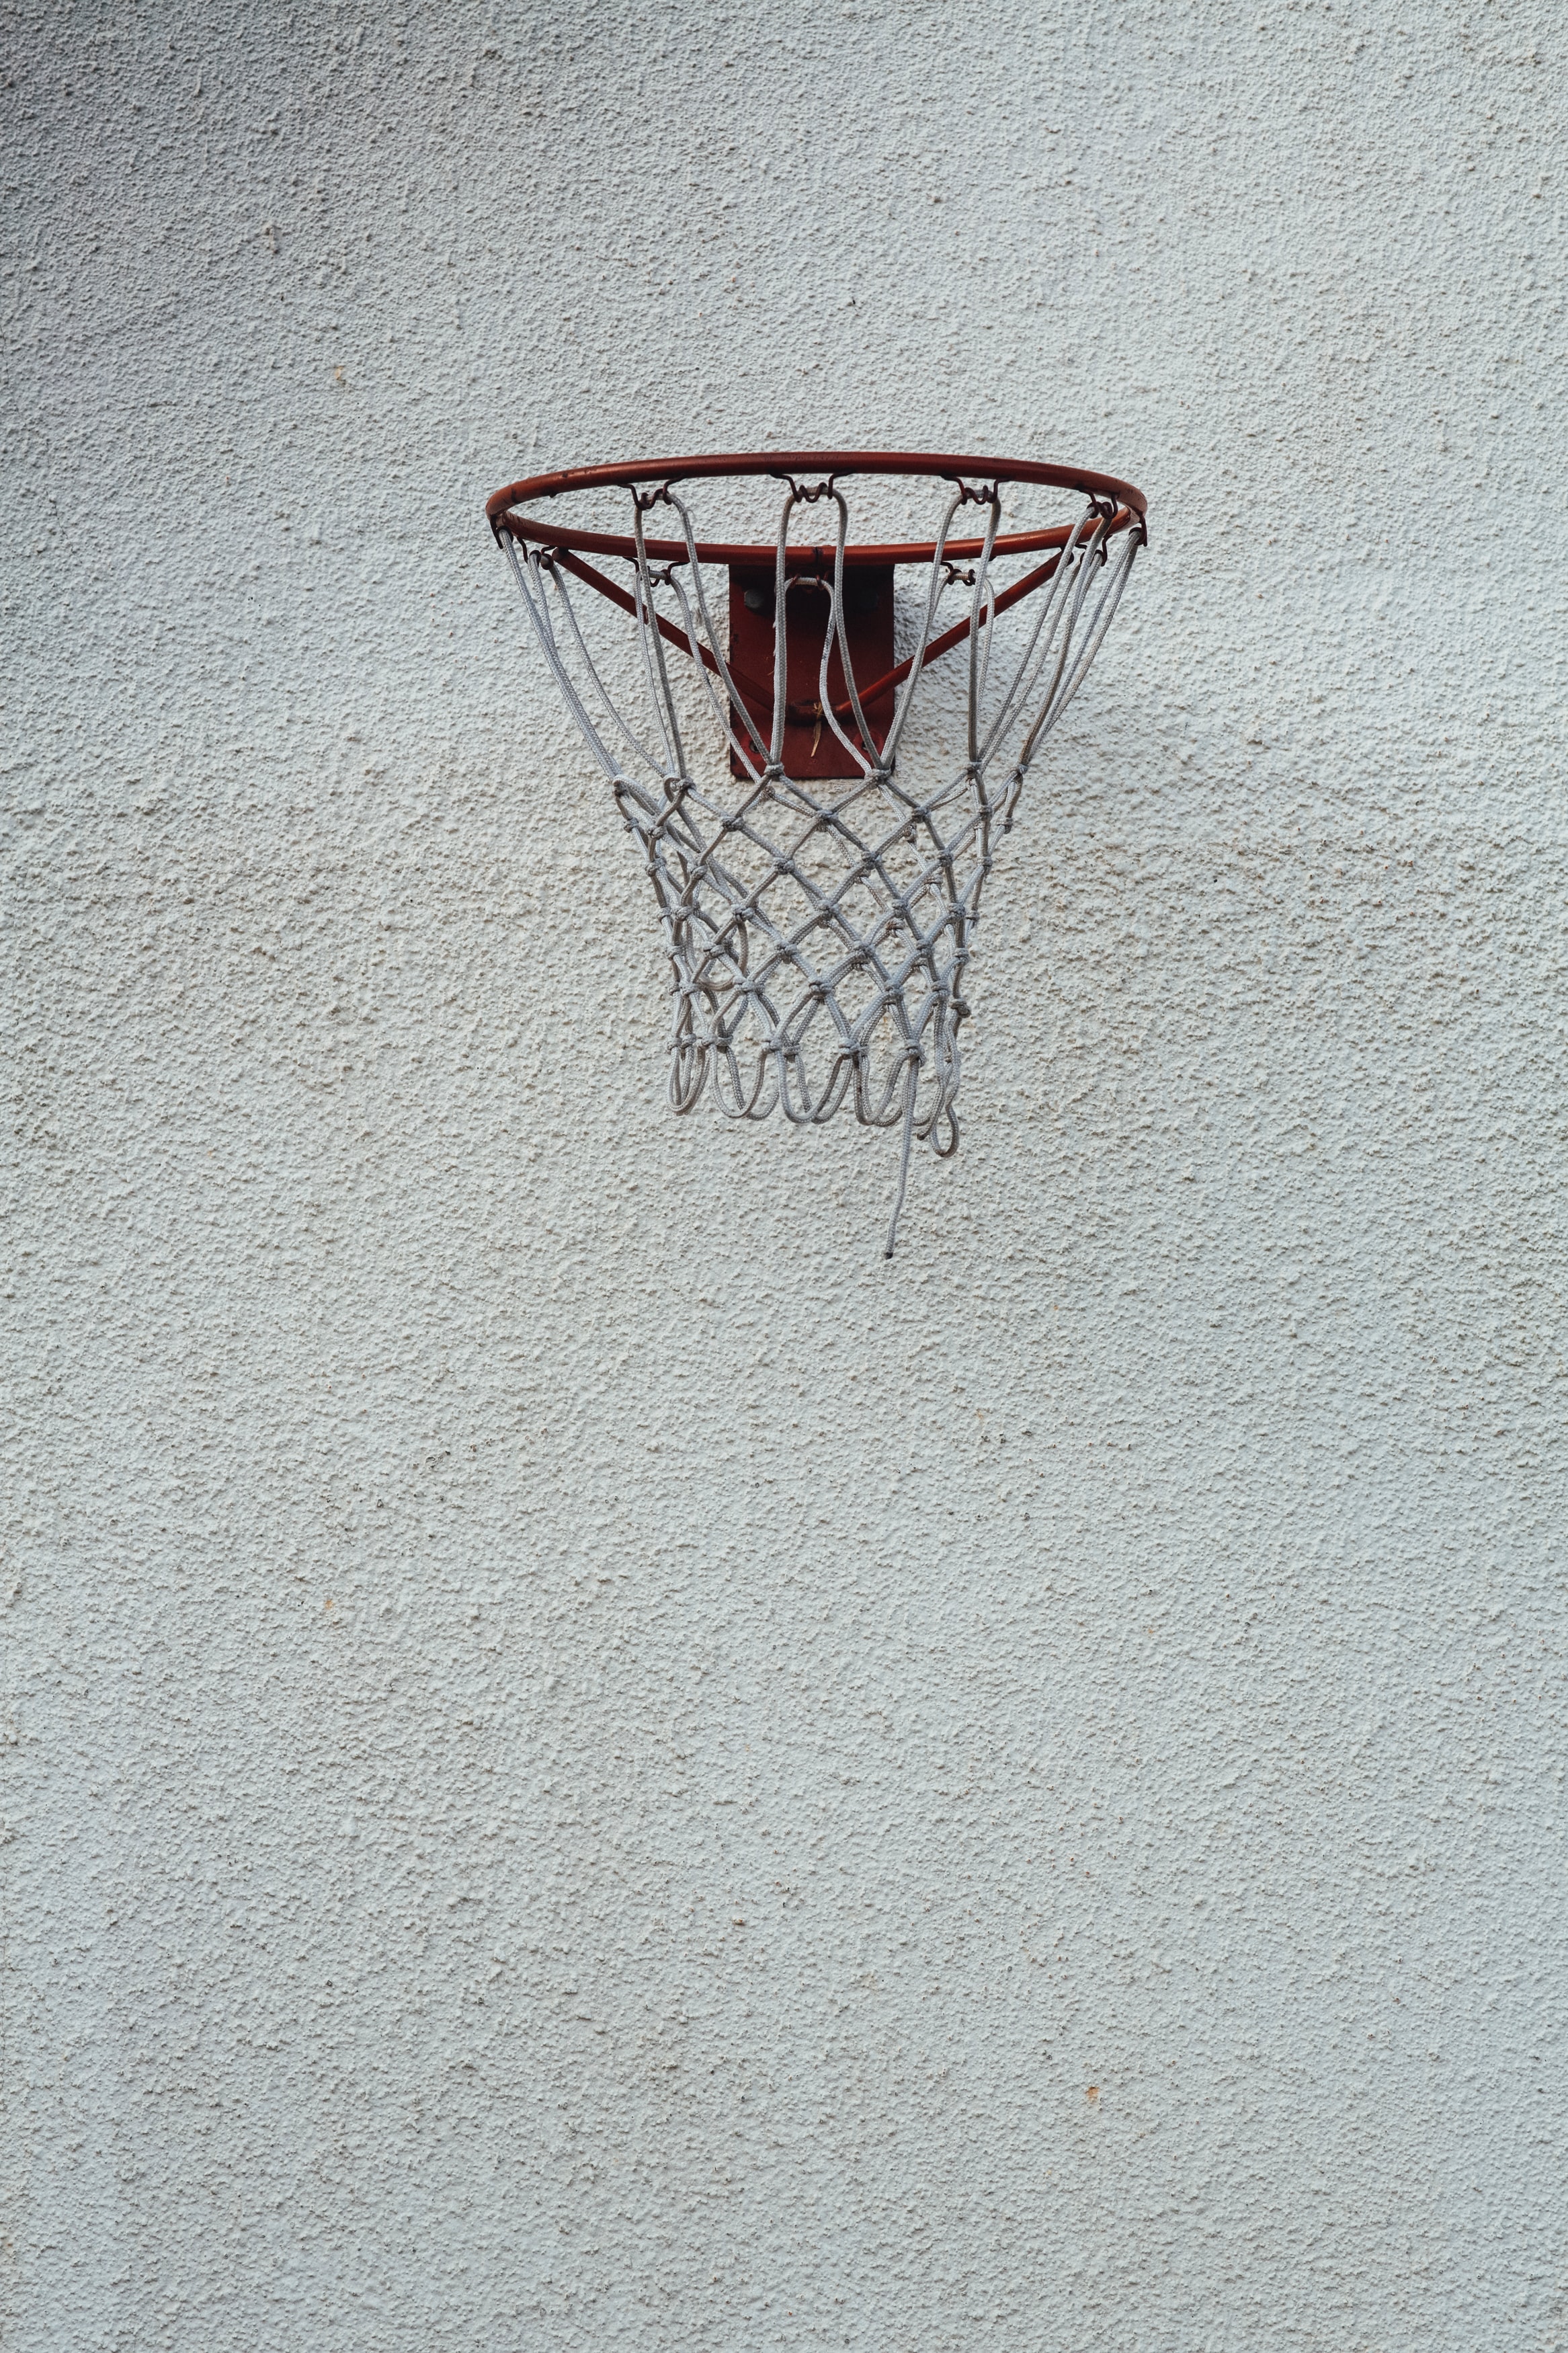 basketball, basketball hoop, basketball ring, miscellanea, miscellaneous, grid, wall 5K